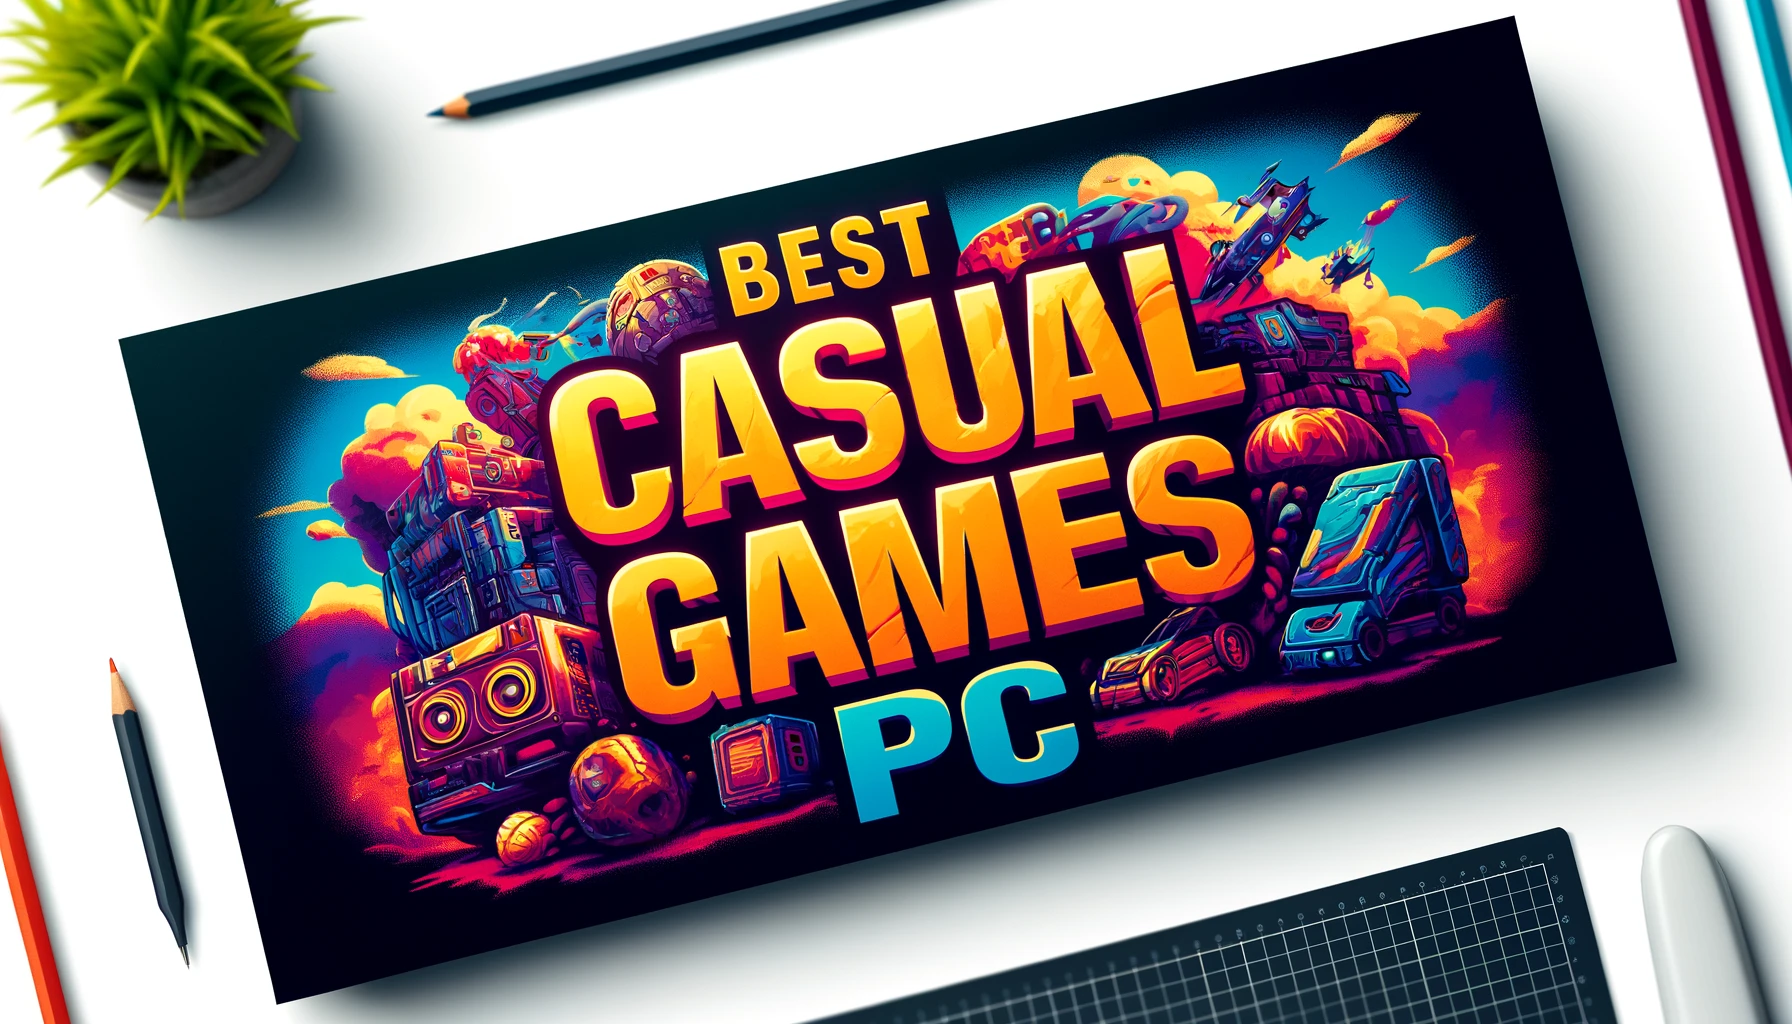 Best Casual Games PC - Feature Image